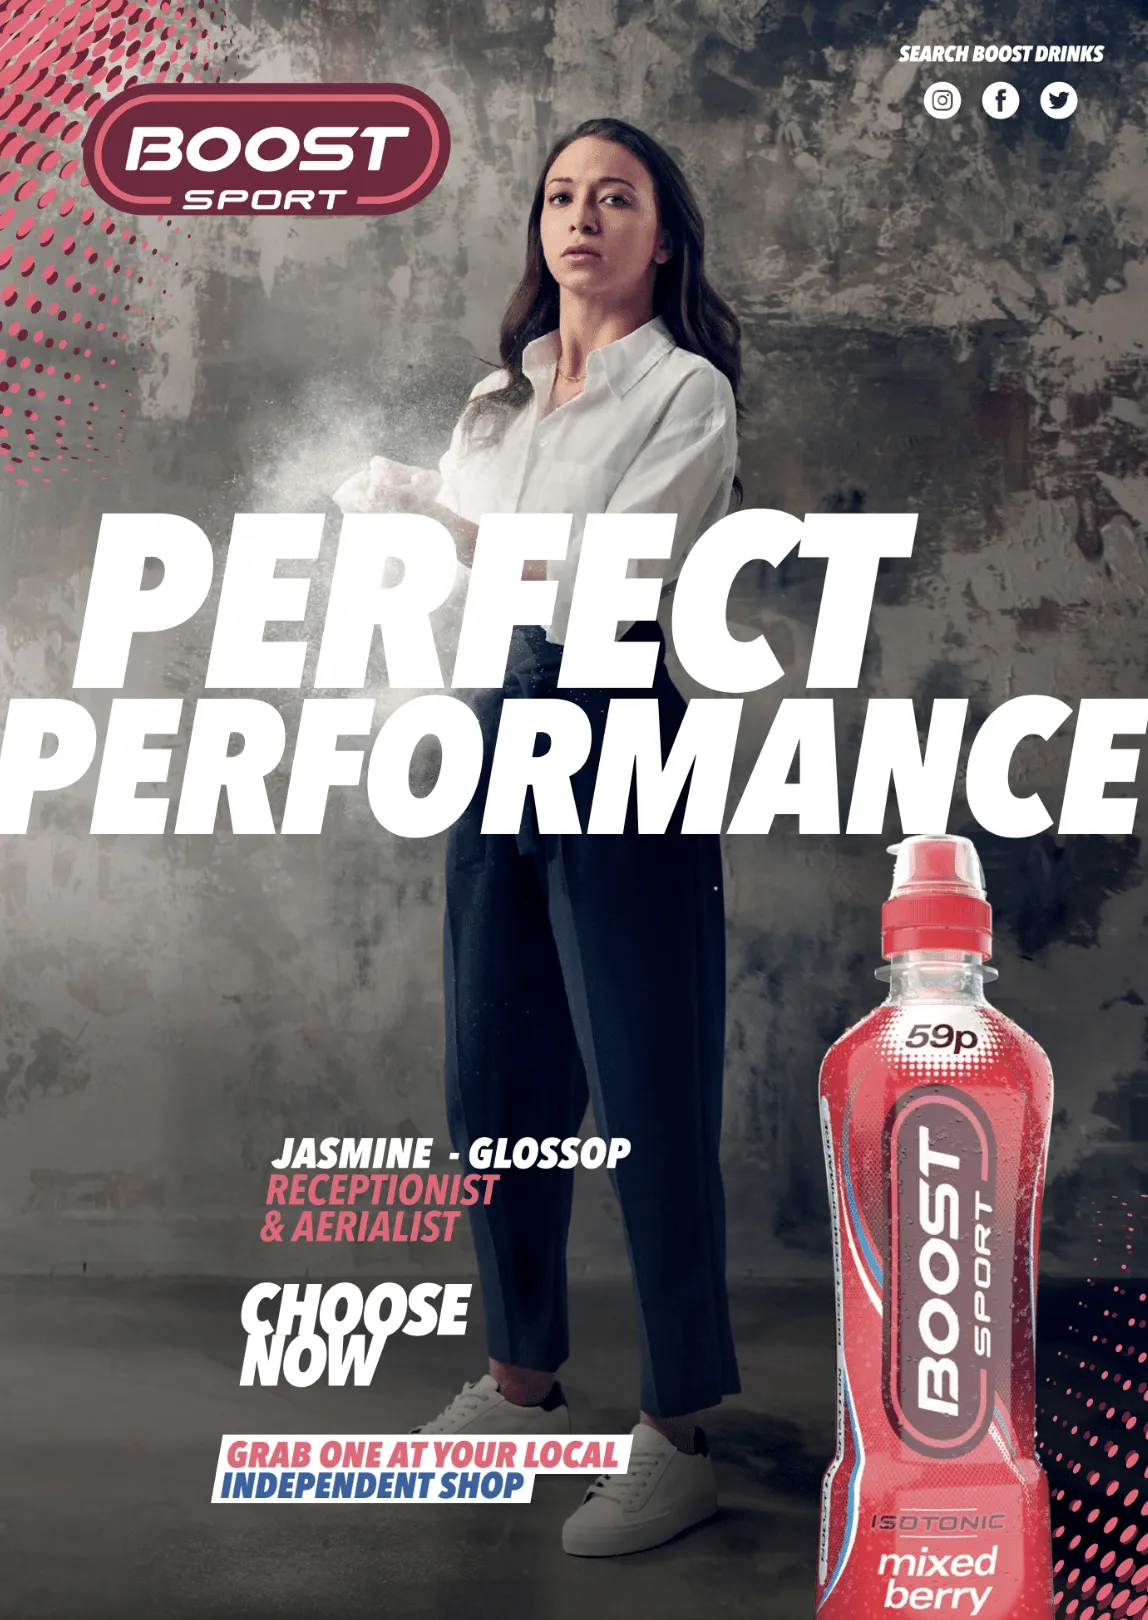 A woman is standing next to a bottle of boost sport.